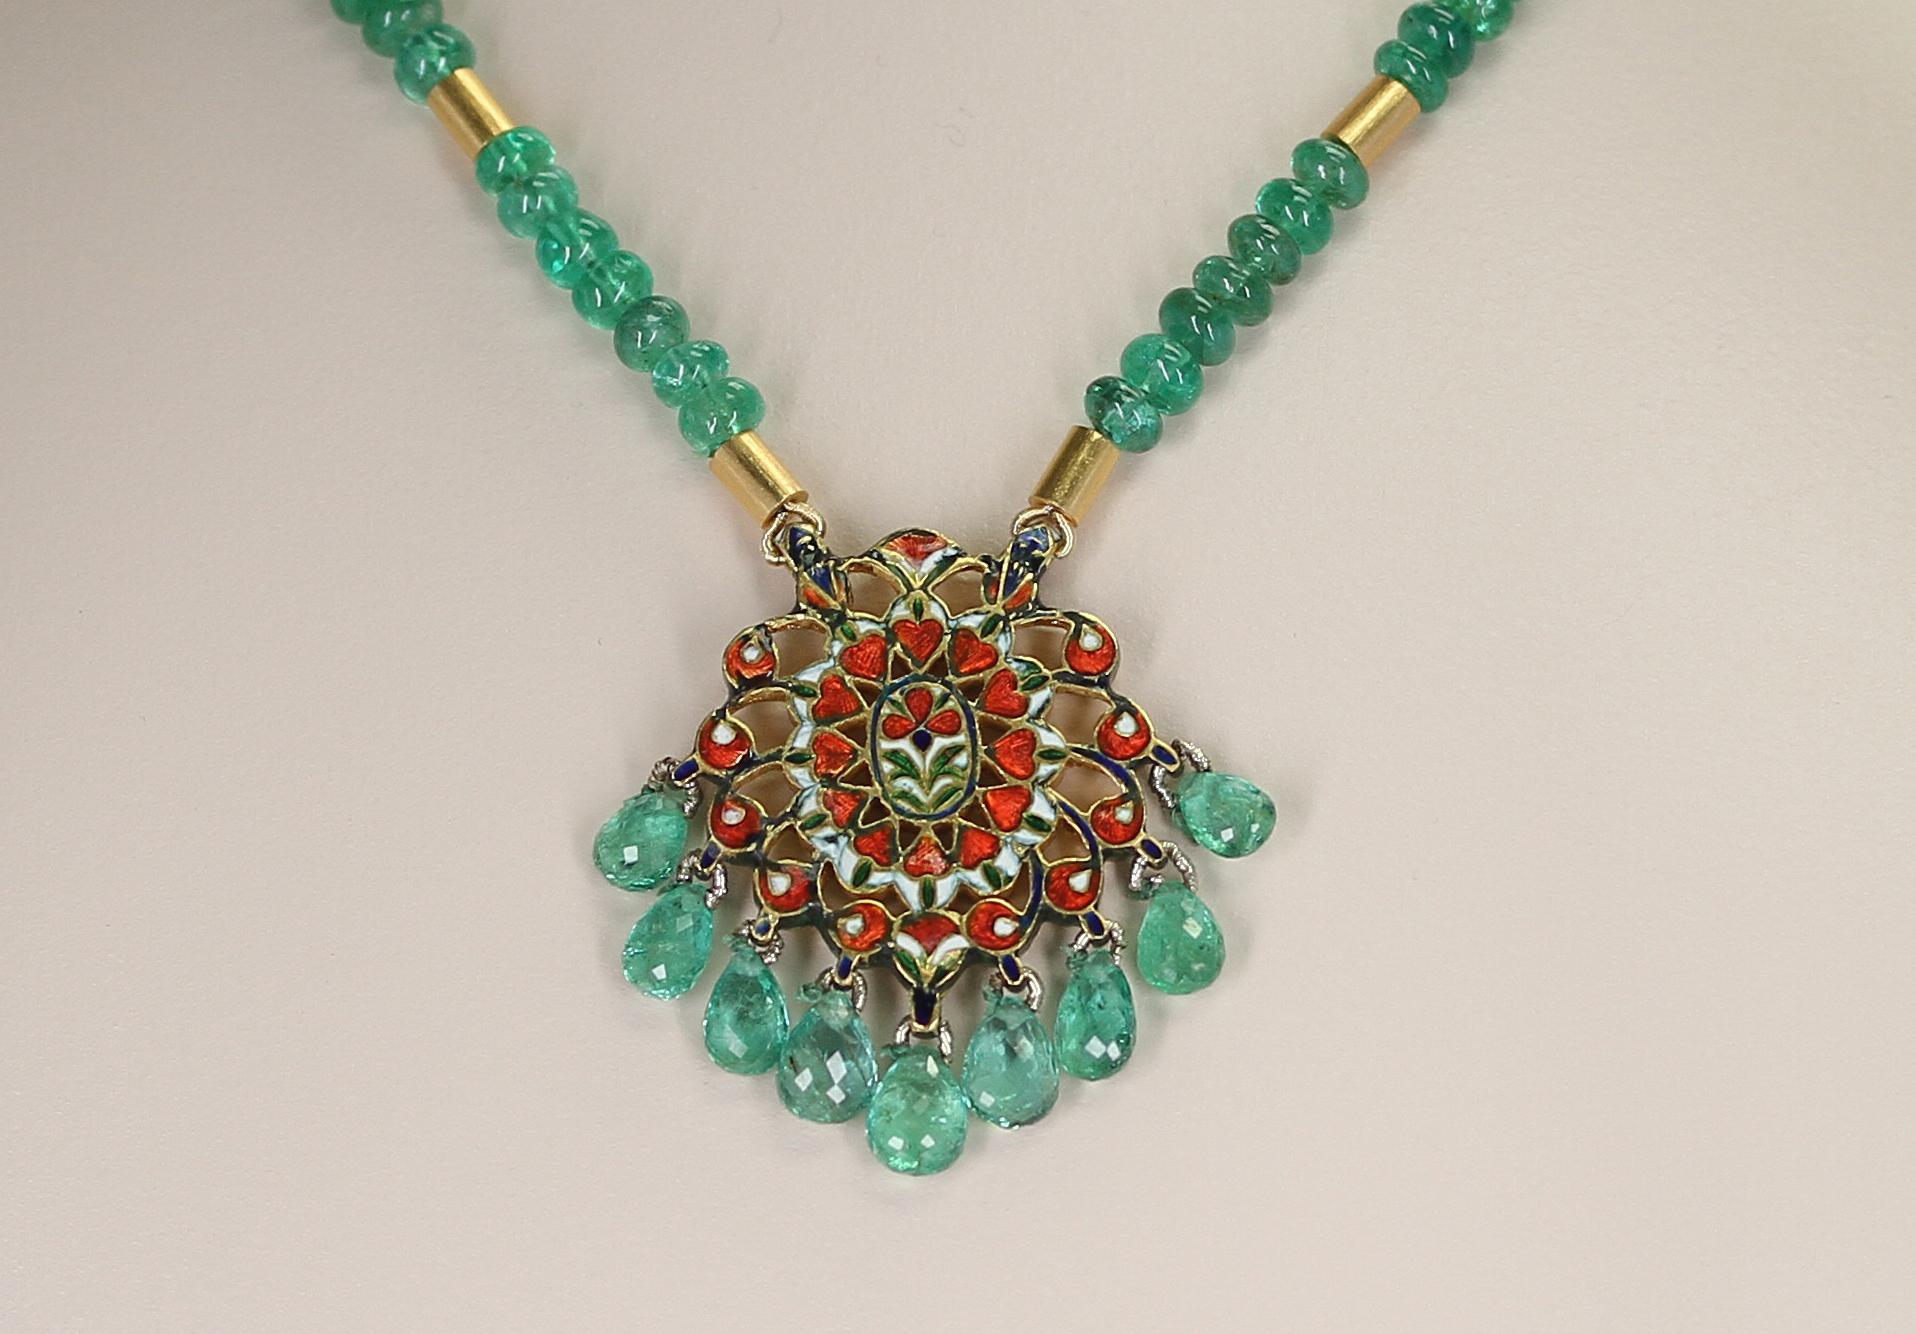 A Genuine & Natural Plain Emerald Beads Necklace with an Indian Kundan Enamel Pendant. The emerald beads are 5 to 6MM. The clasp is 14K Yellow Gold. Total Weight: 193 carats, the length is 18 Inches. The Gold beads are 18 Karat. In the enamel